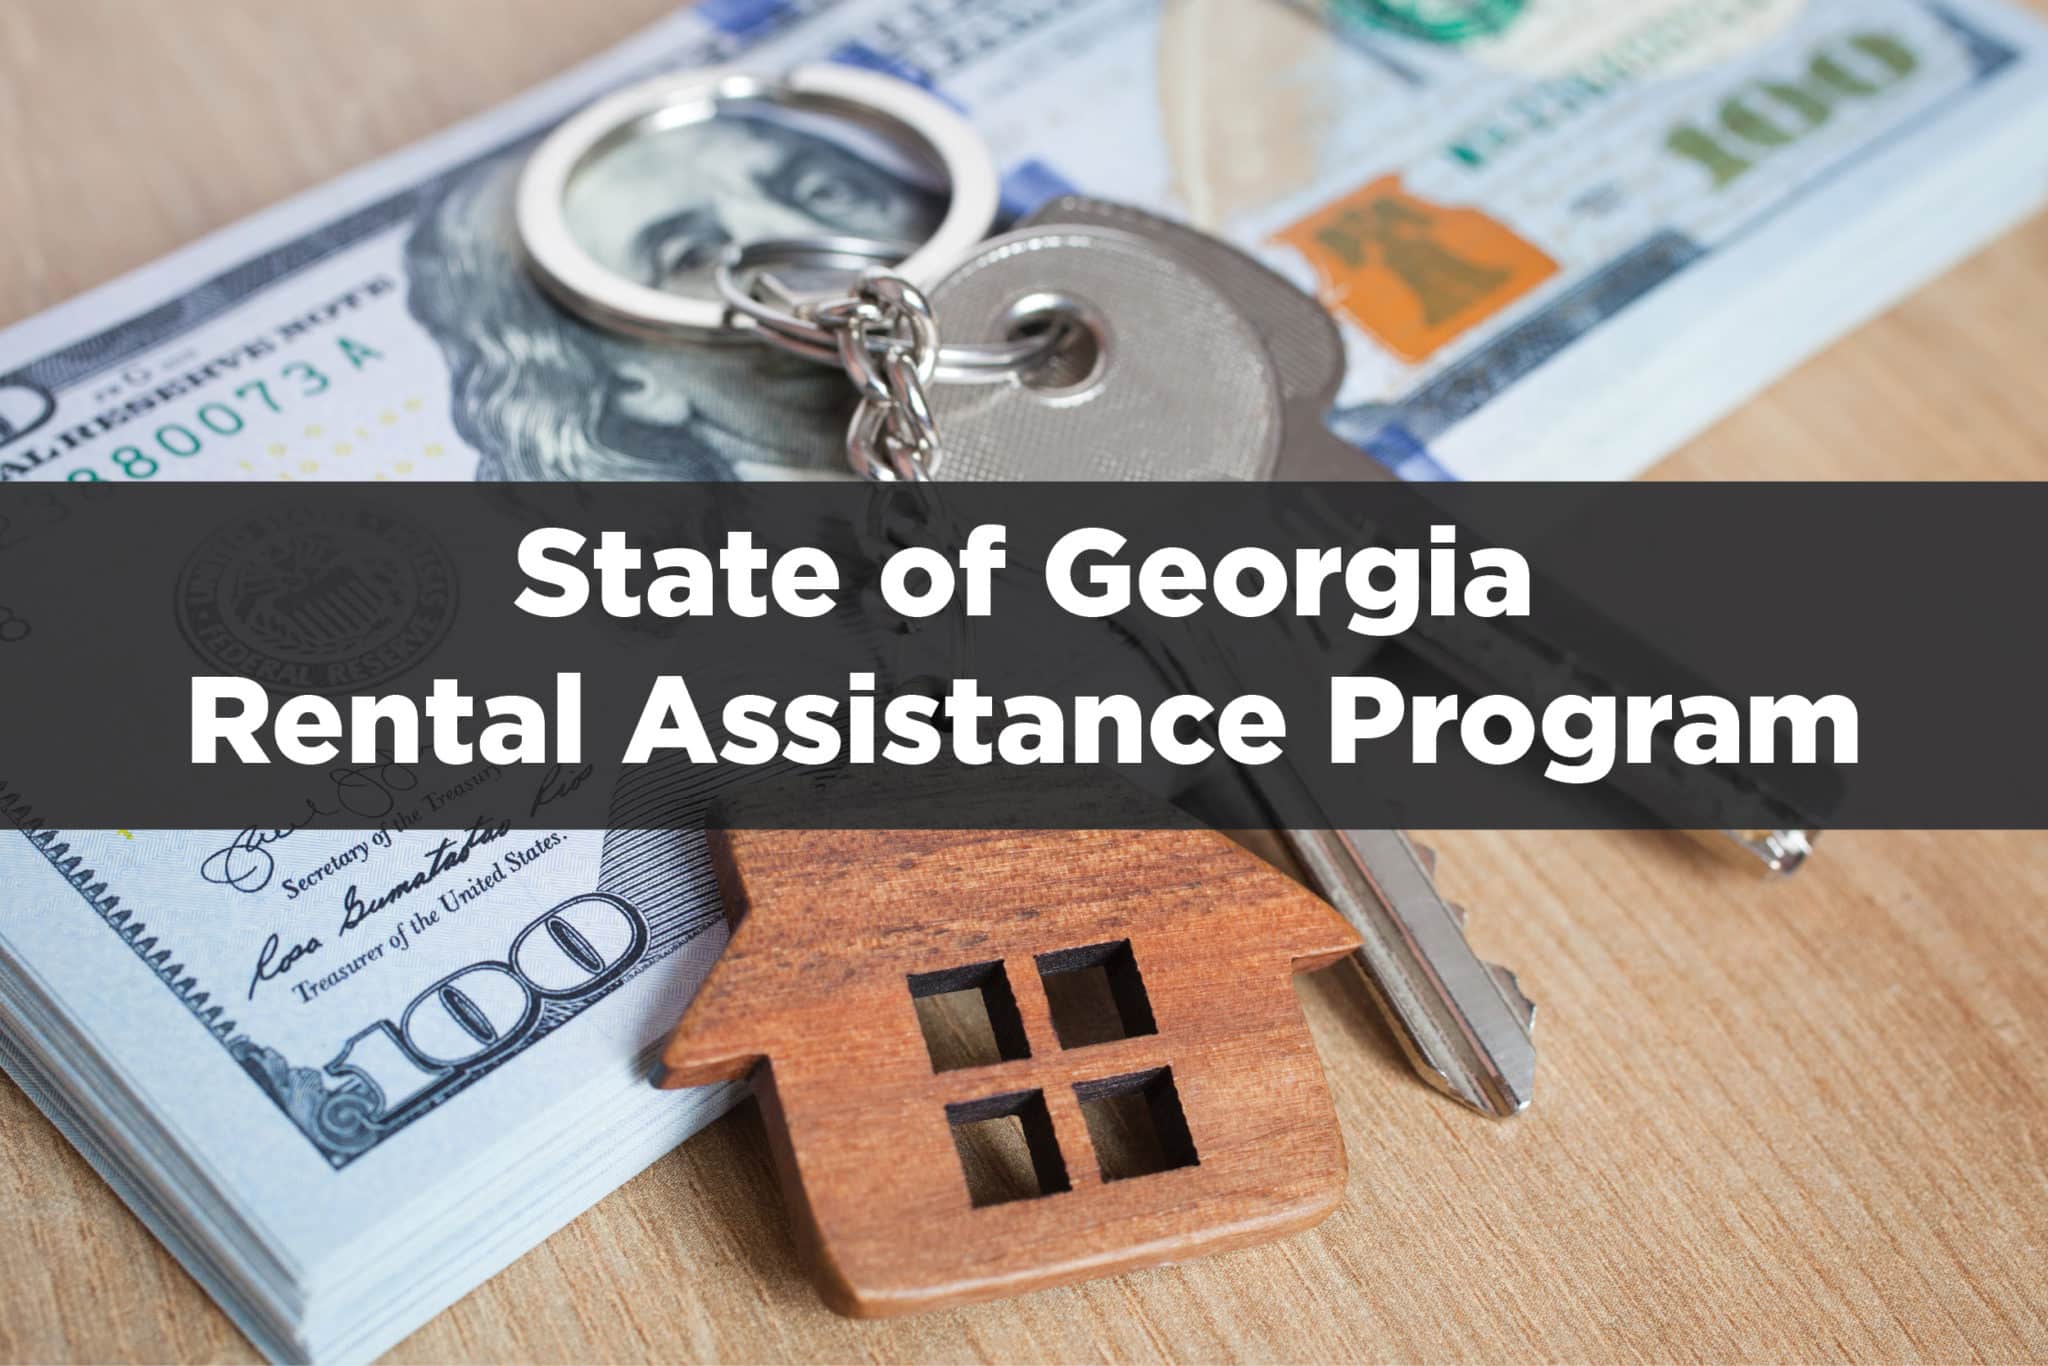 Rental Assistance Program Provides Relief to Families Amid Pandemic